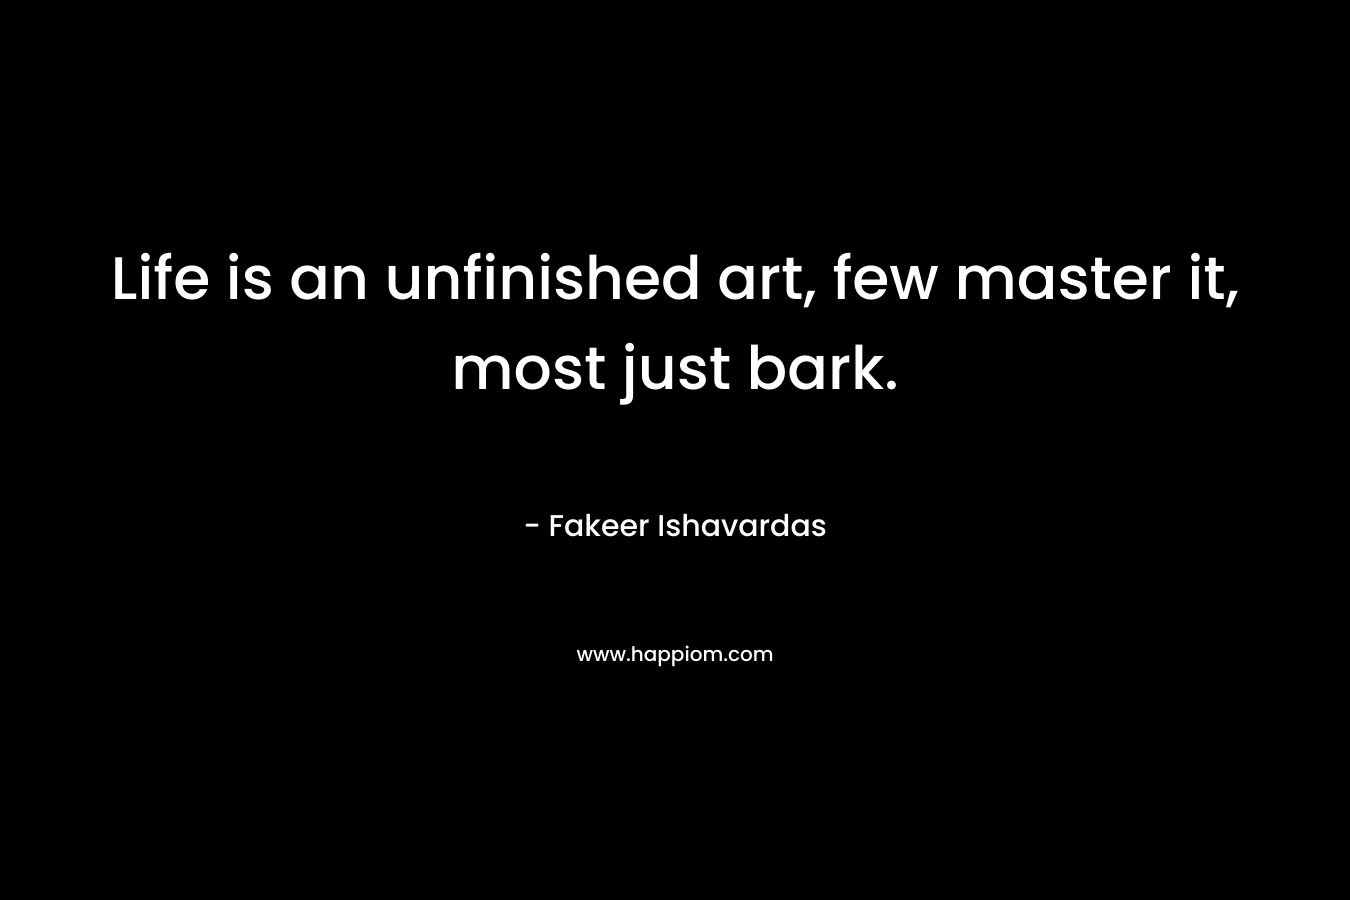 Life is an unfinished art, few master it, most just bark.